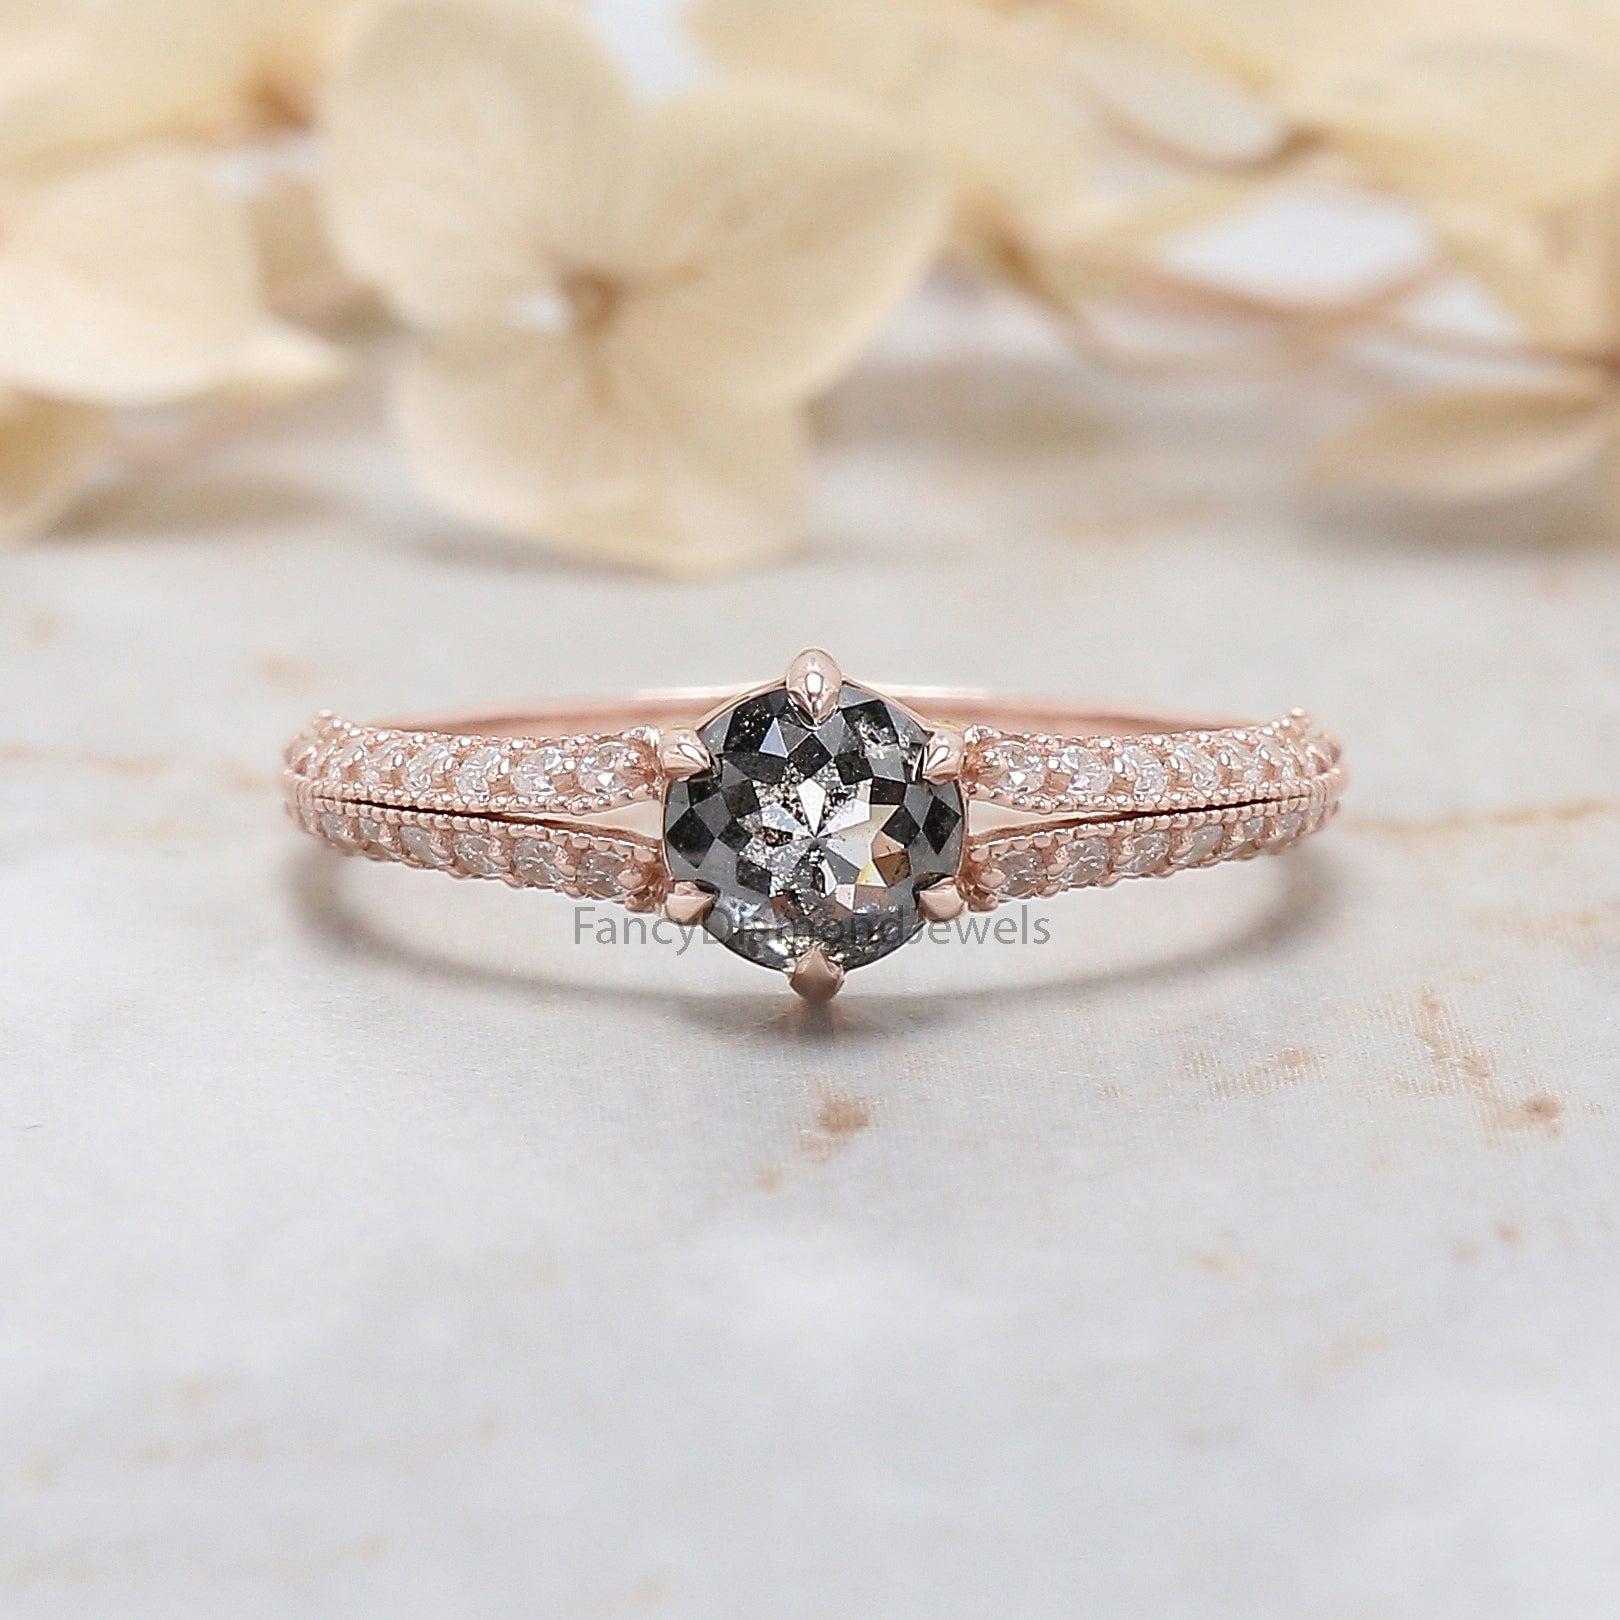 Round Rose Cut Salt And Pepper Diamond Ring 0.83 Ct 5.30 MM Round Diamond Ring 14K Rose Gold Silver Engagement Ring Gift For Her QN9672